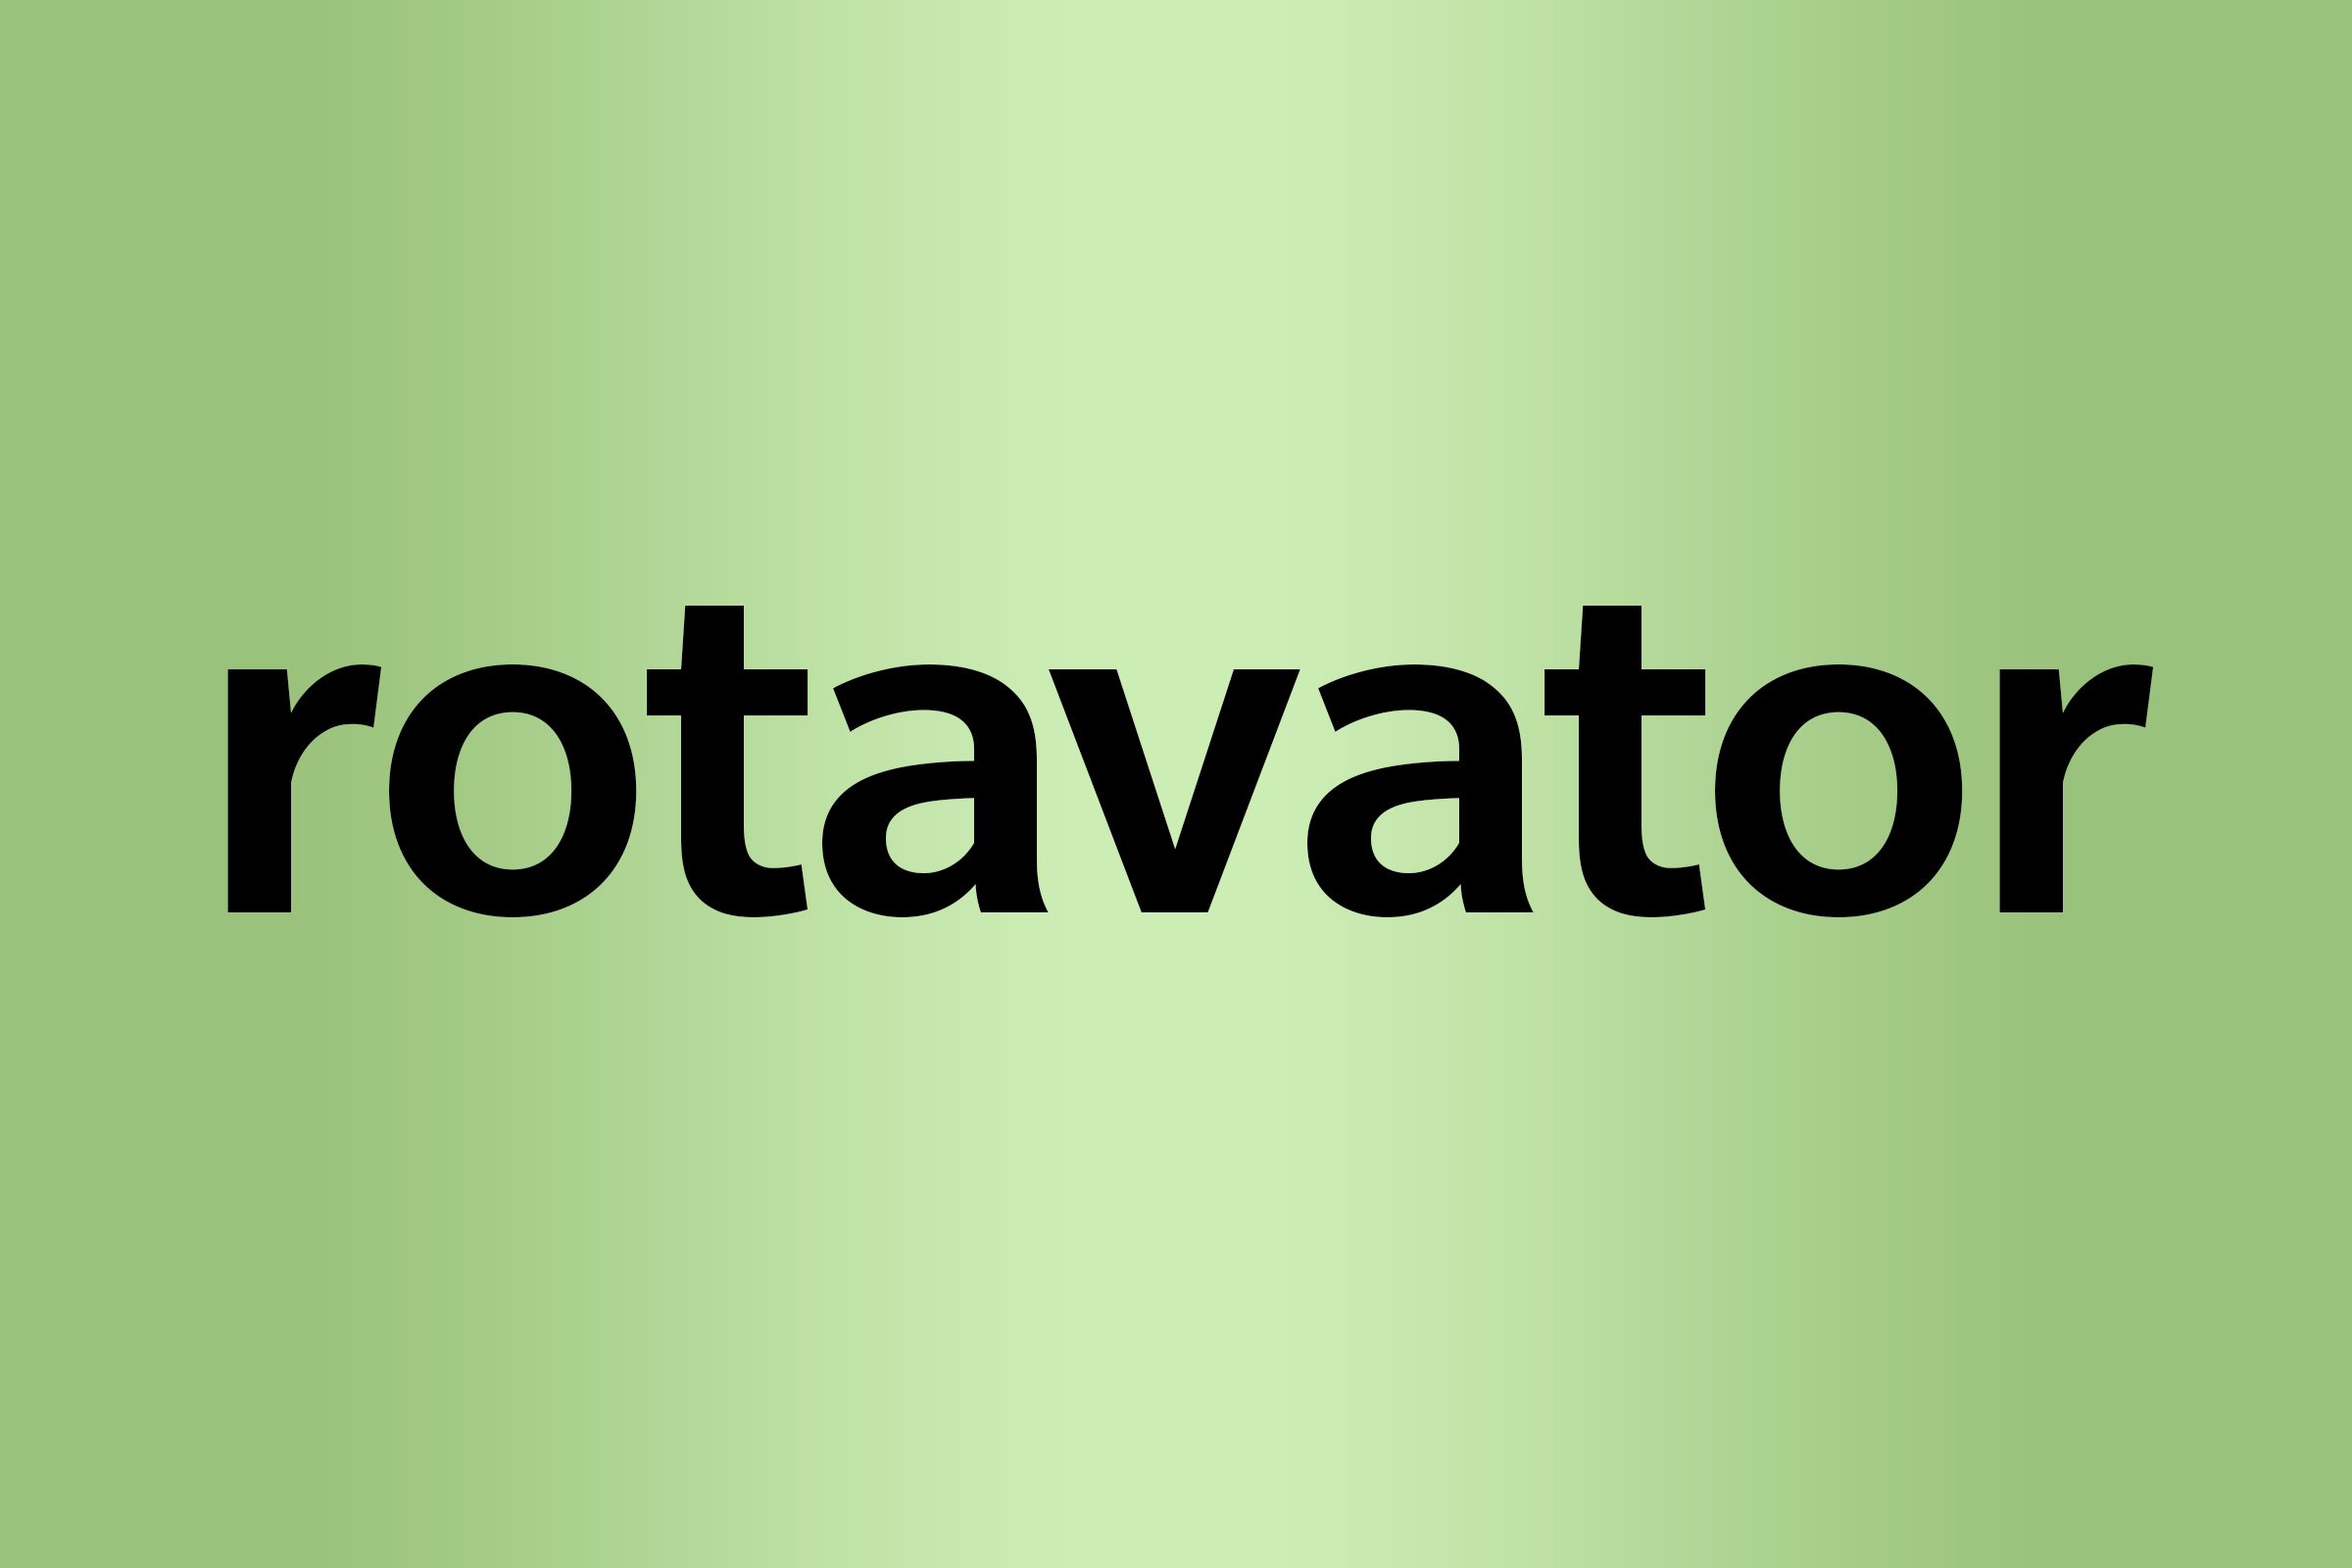 rotavator What is a palindrome